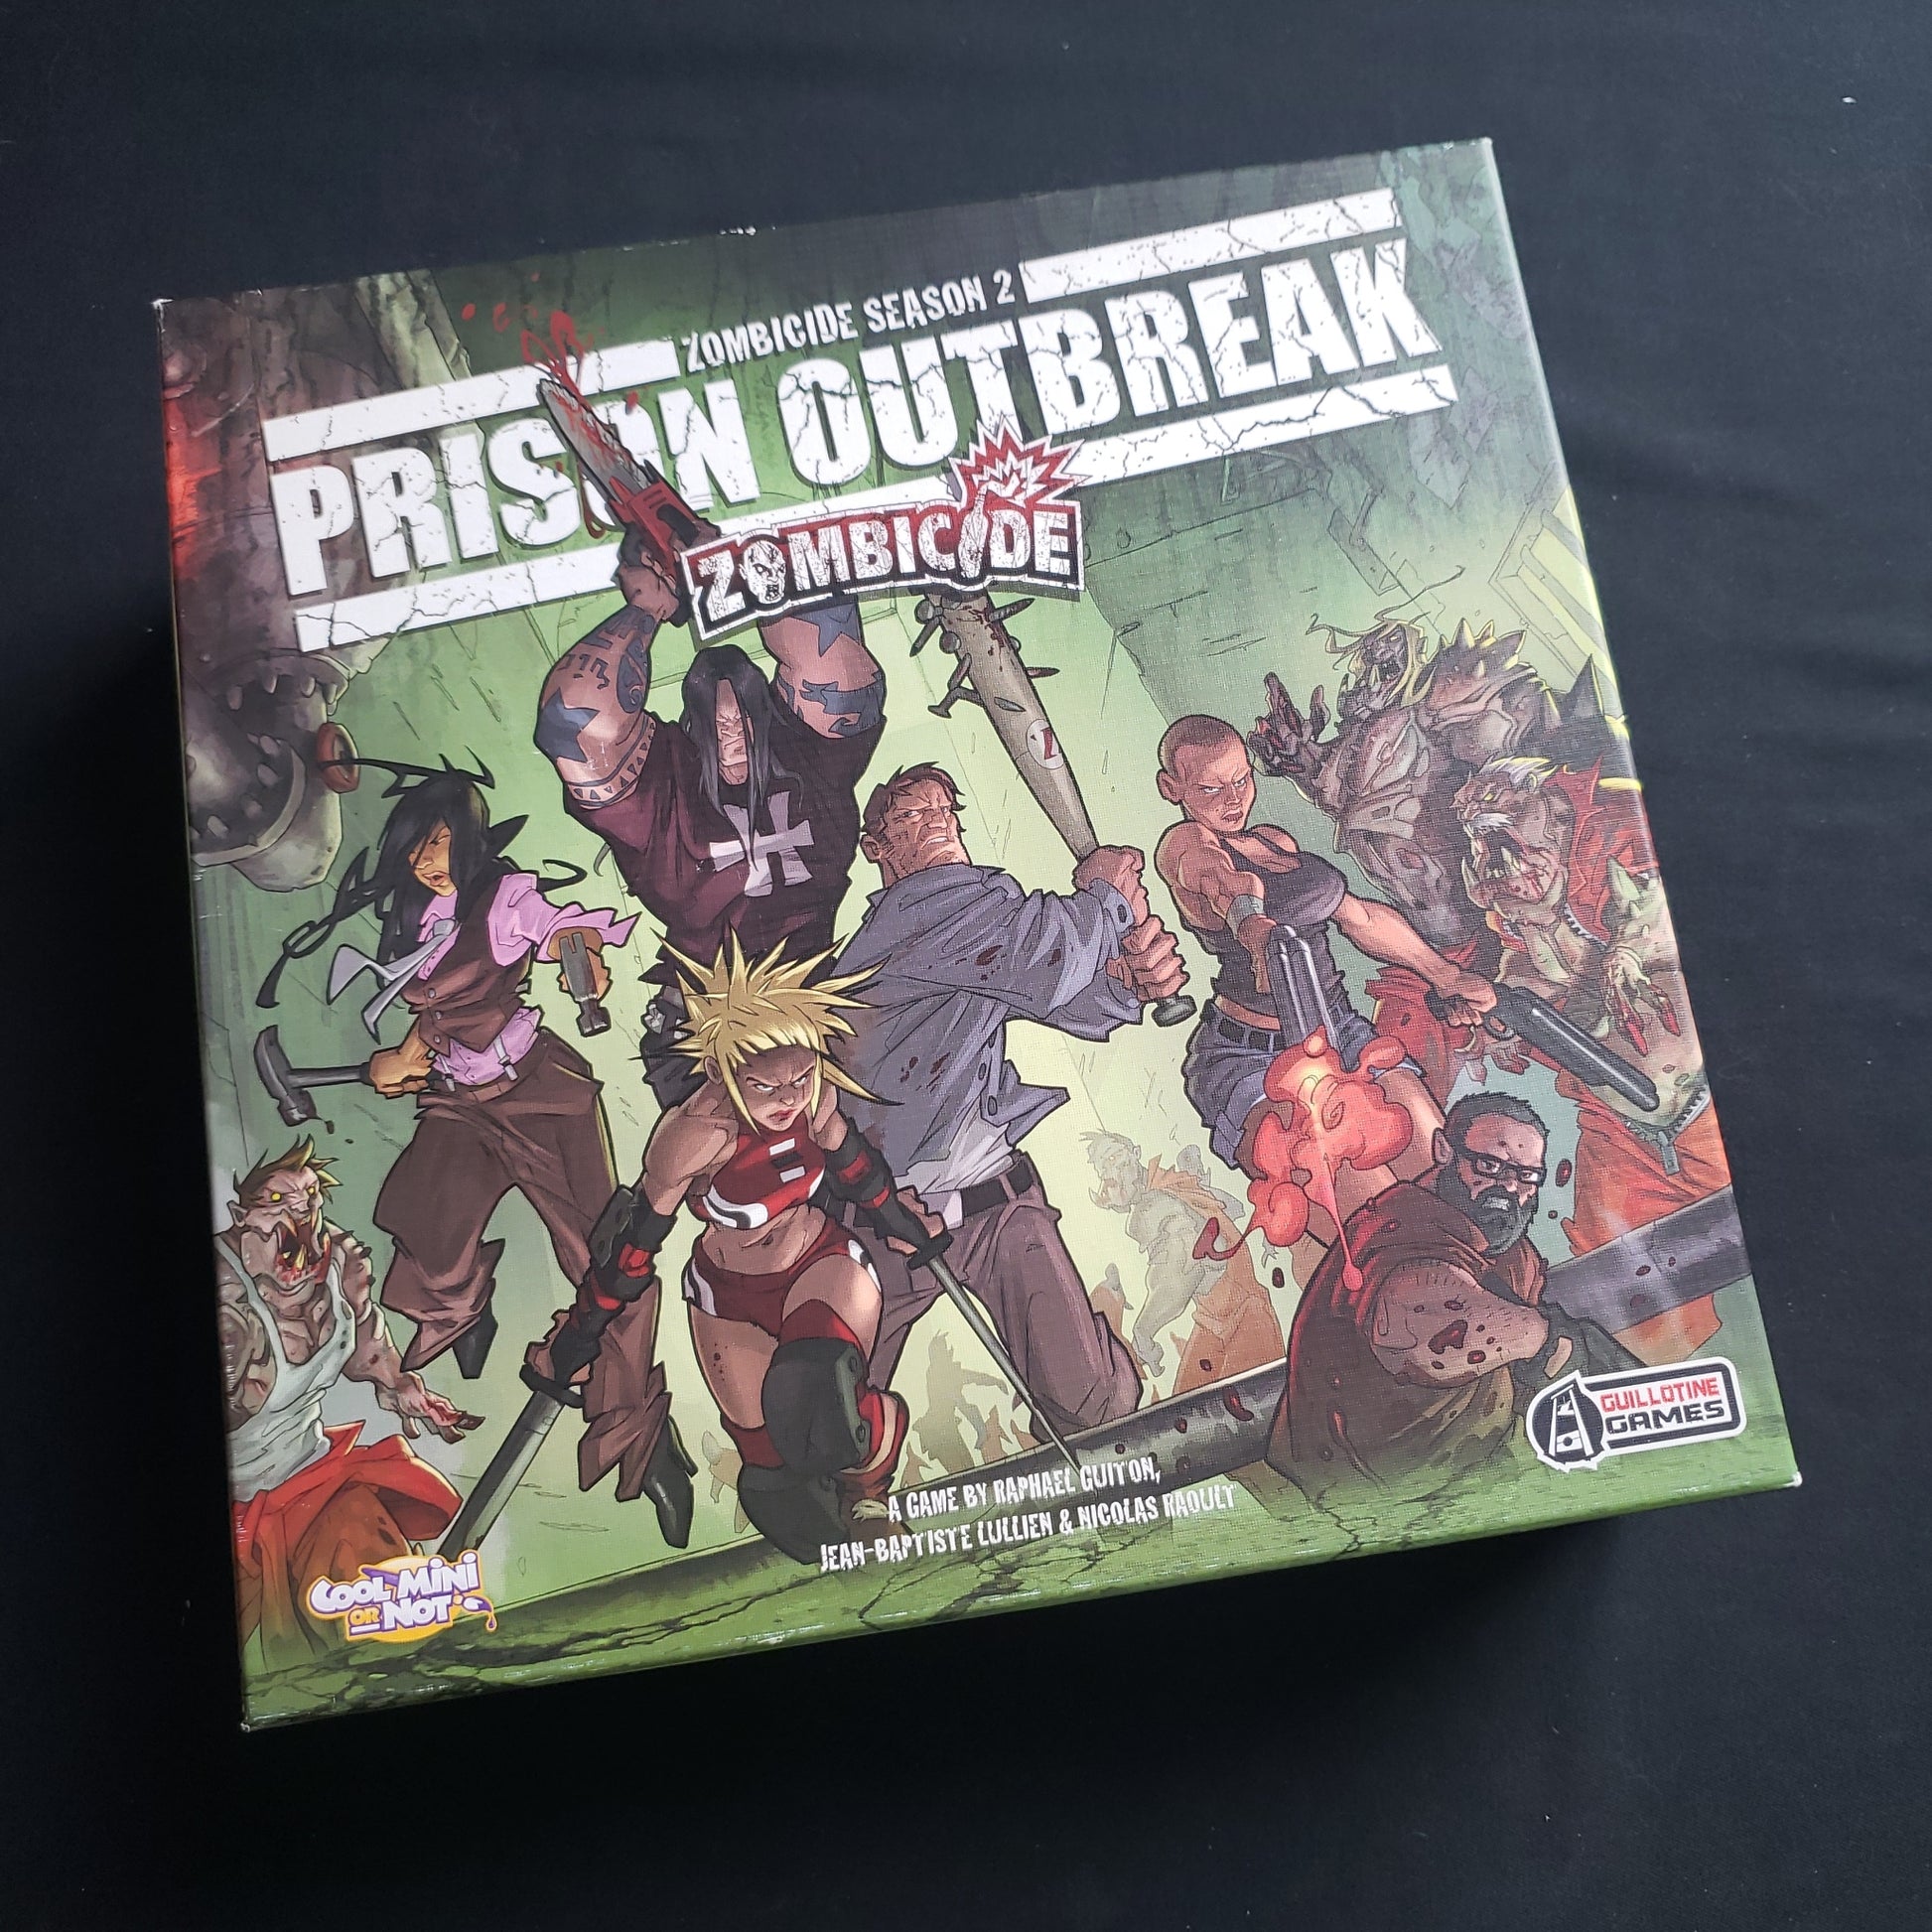 Image shows the front cover of the box of the Zombicide Season 2: Prison Outbreak board game